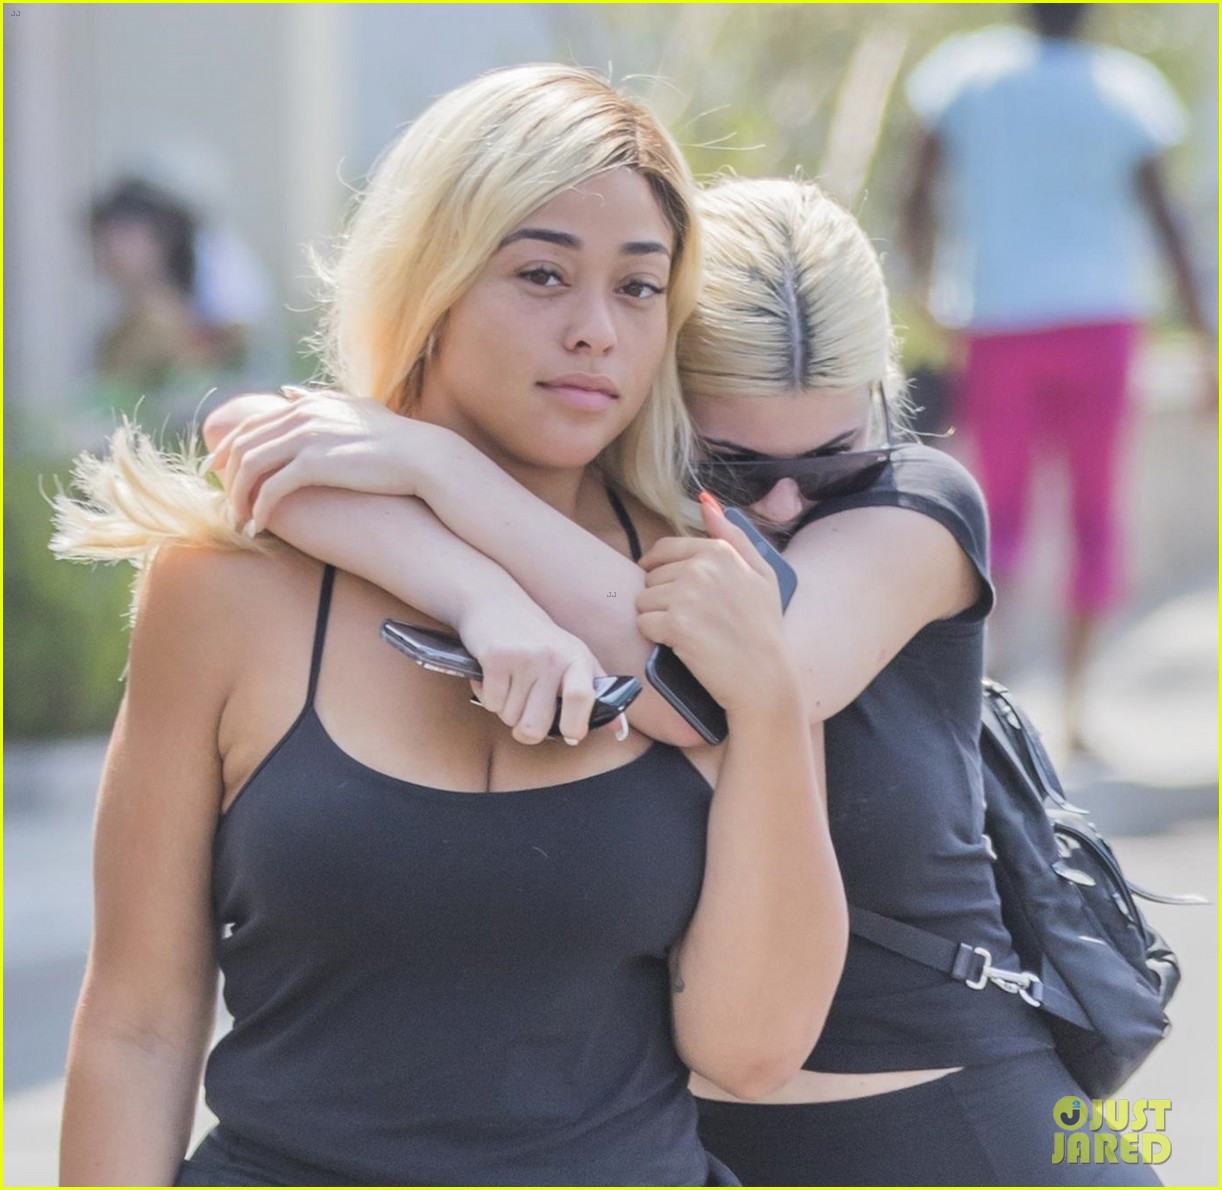 kylie jenner and bff jordyn woods stay attached at the hip while out in la 04